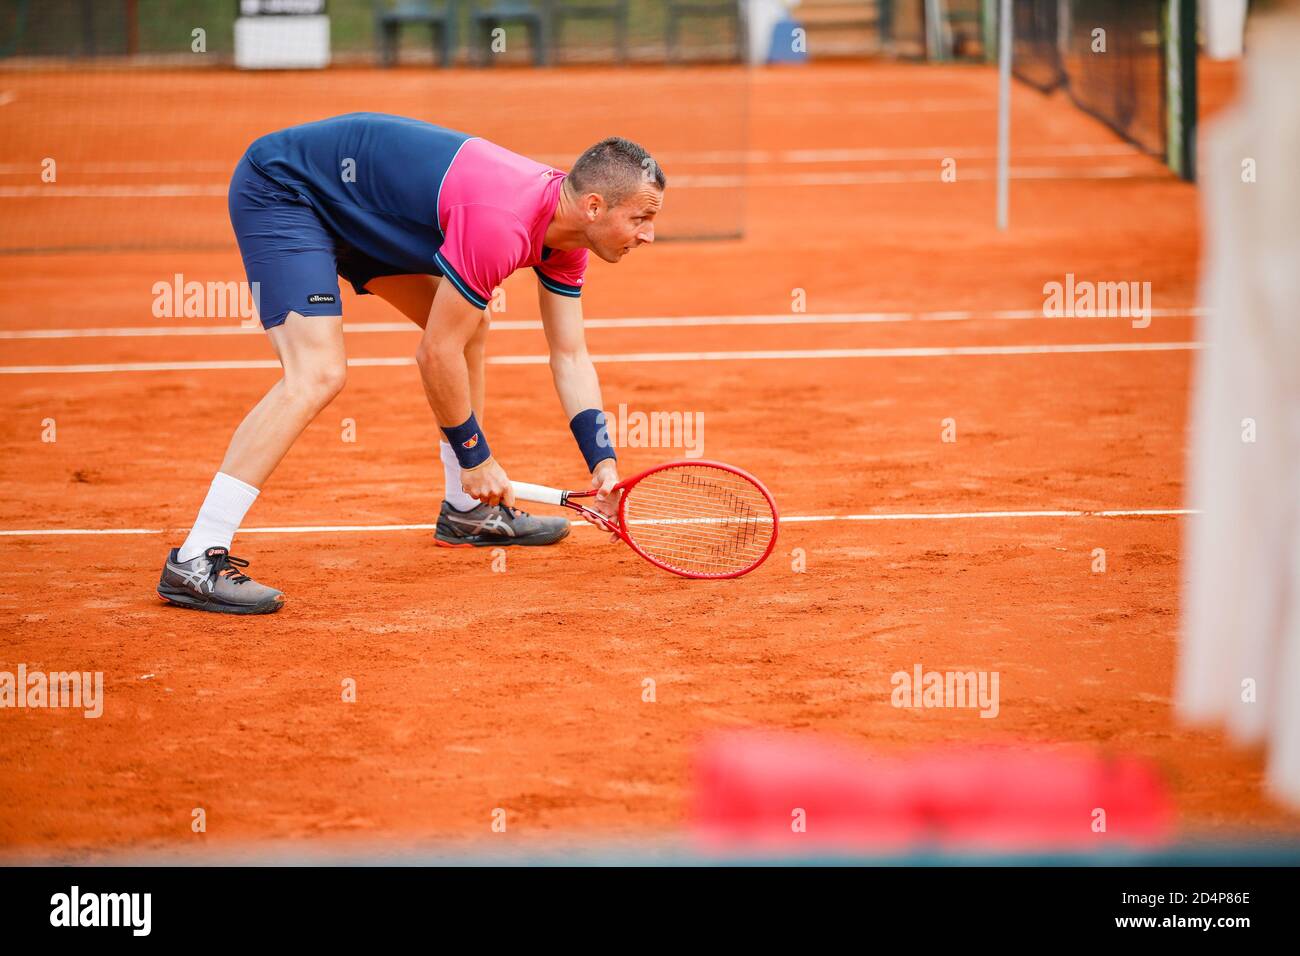 Tomislav Brkic during ATP Challenger 125 - Internazionali Emilia Romagna,  Tennis Internationals in parma, Italy, October 09 2020 Stock Photo - Alamy